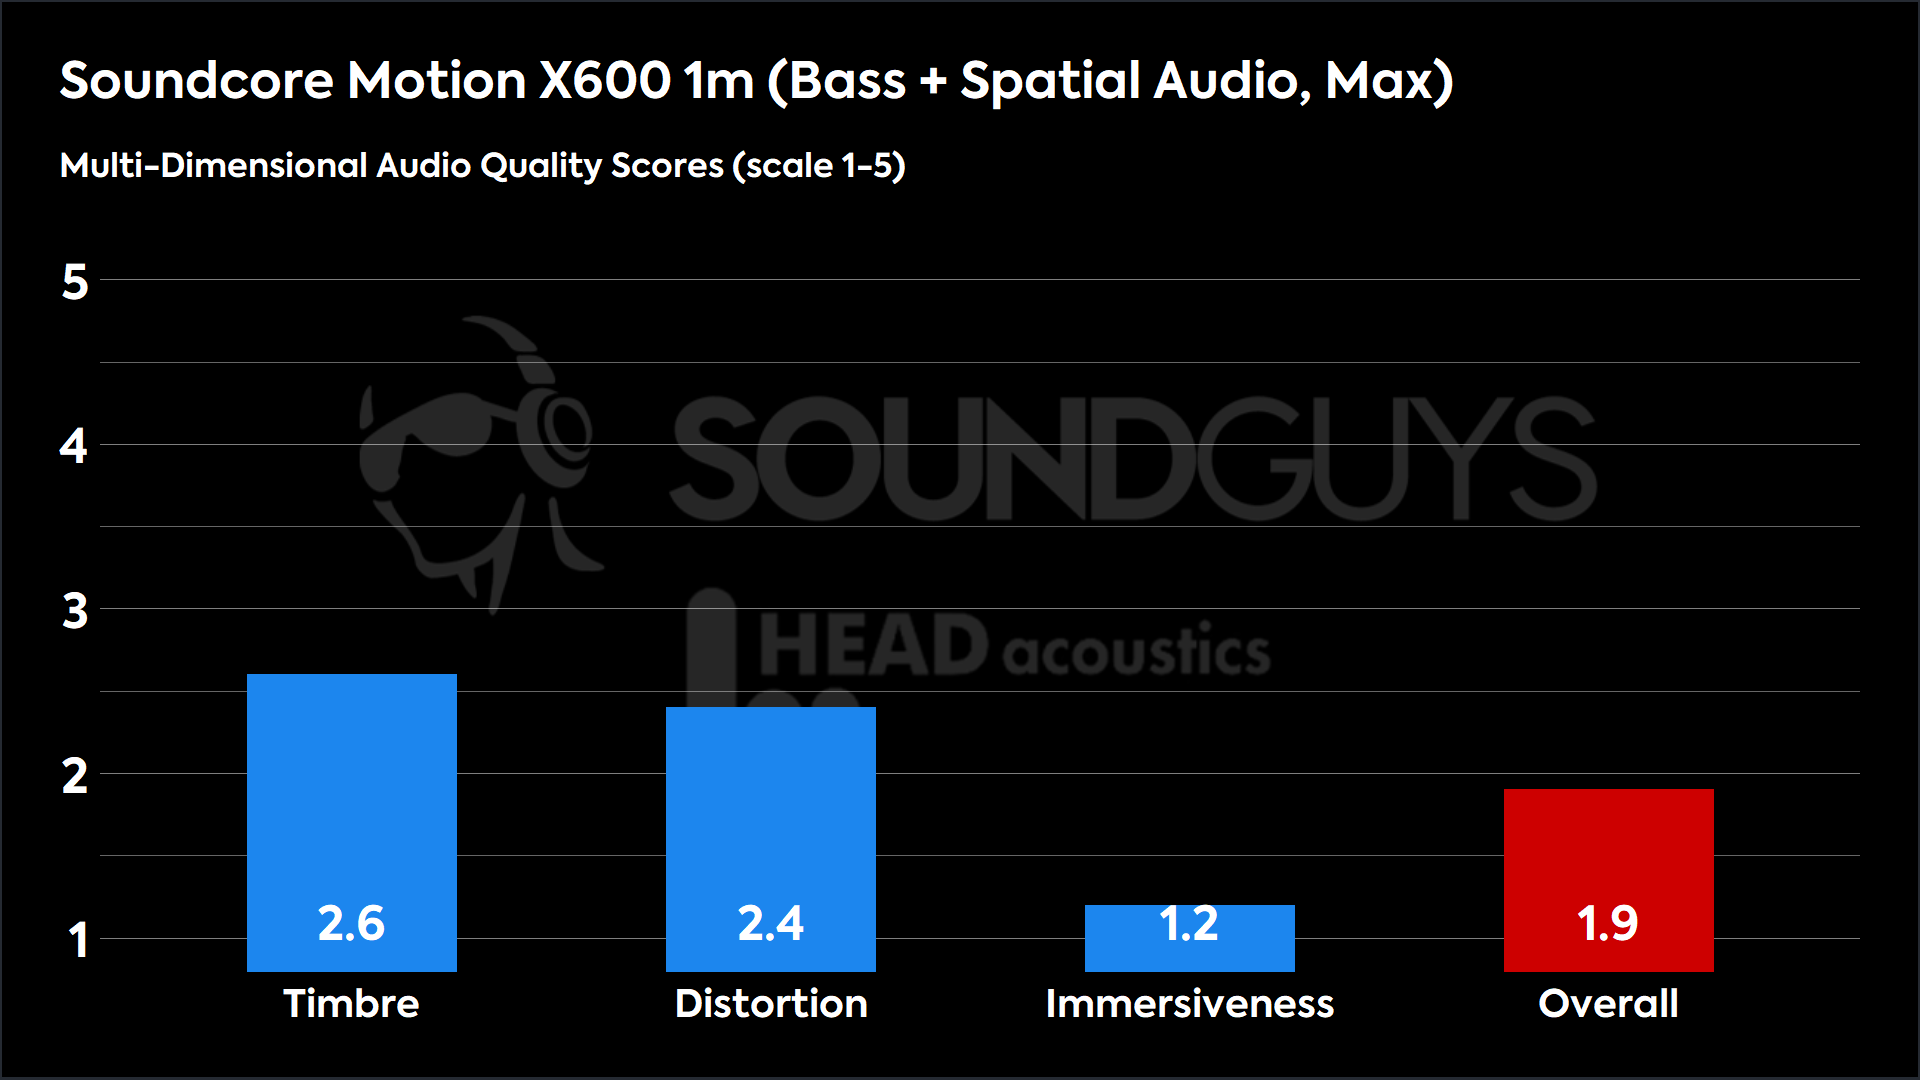 A chart showing the Anker Soundcore Motion X600 MDAQS results at maximum volume with BassUp and spatial audio modes enabled.